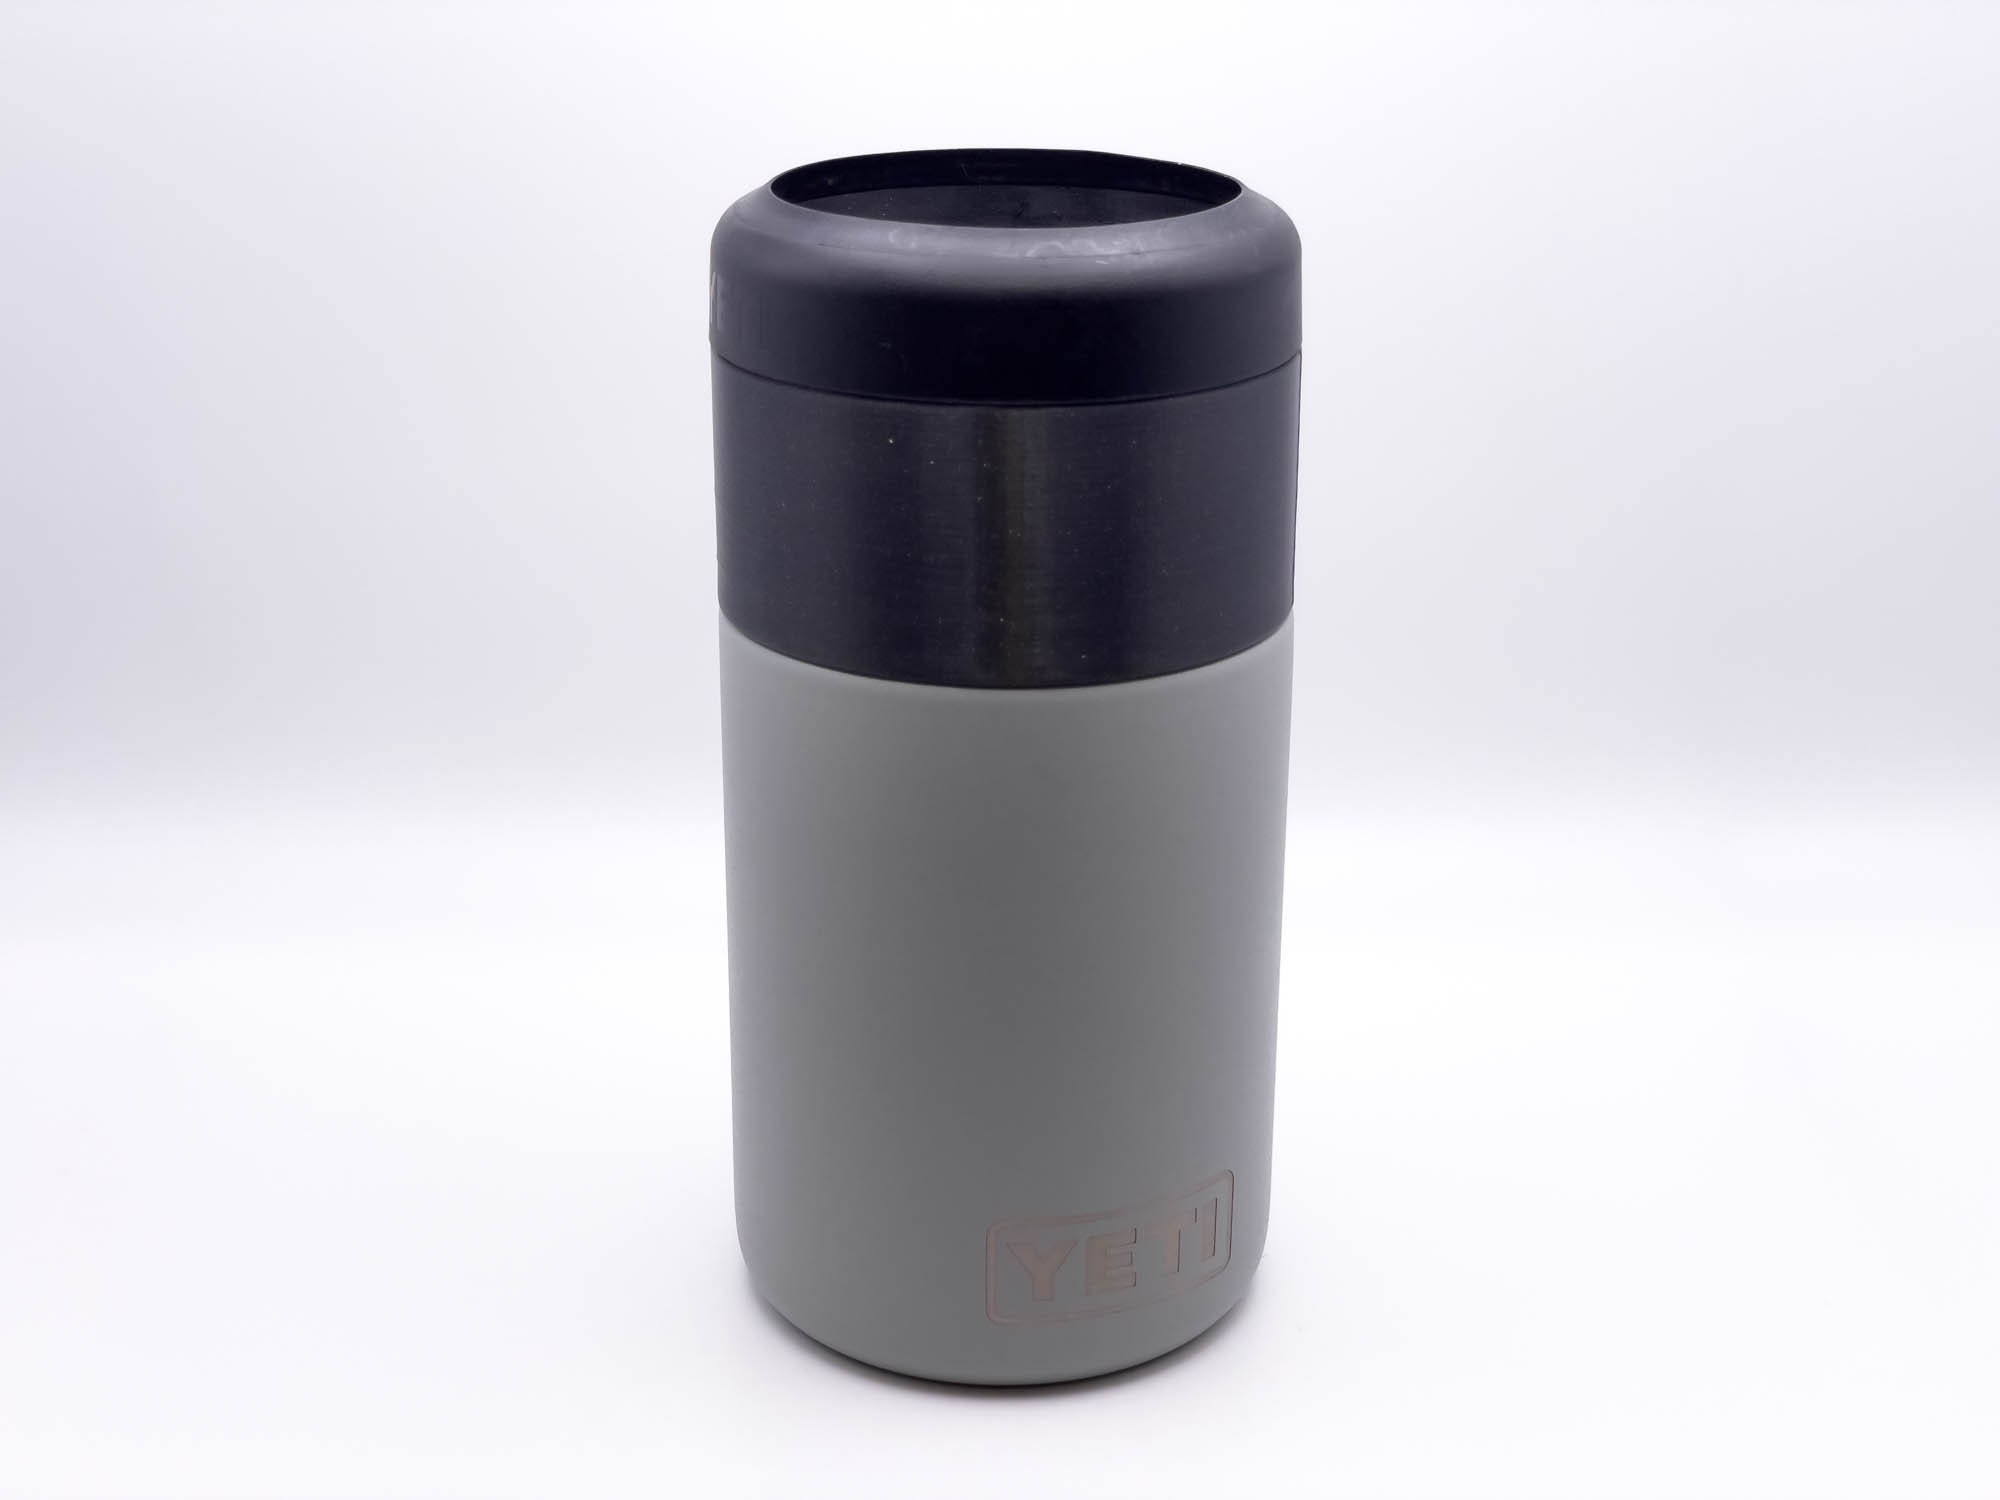 FITY 2 Pack A 12oz Can Adapter for the 16oz YETI and Miir Tall